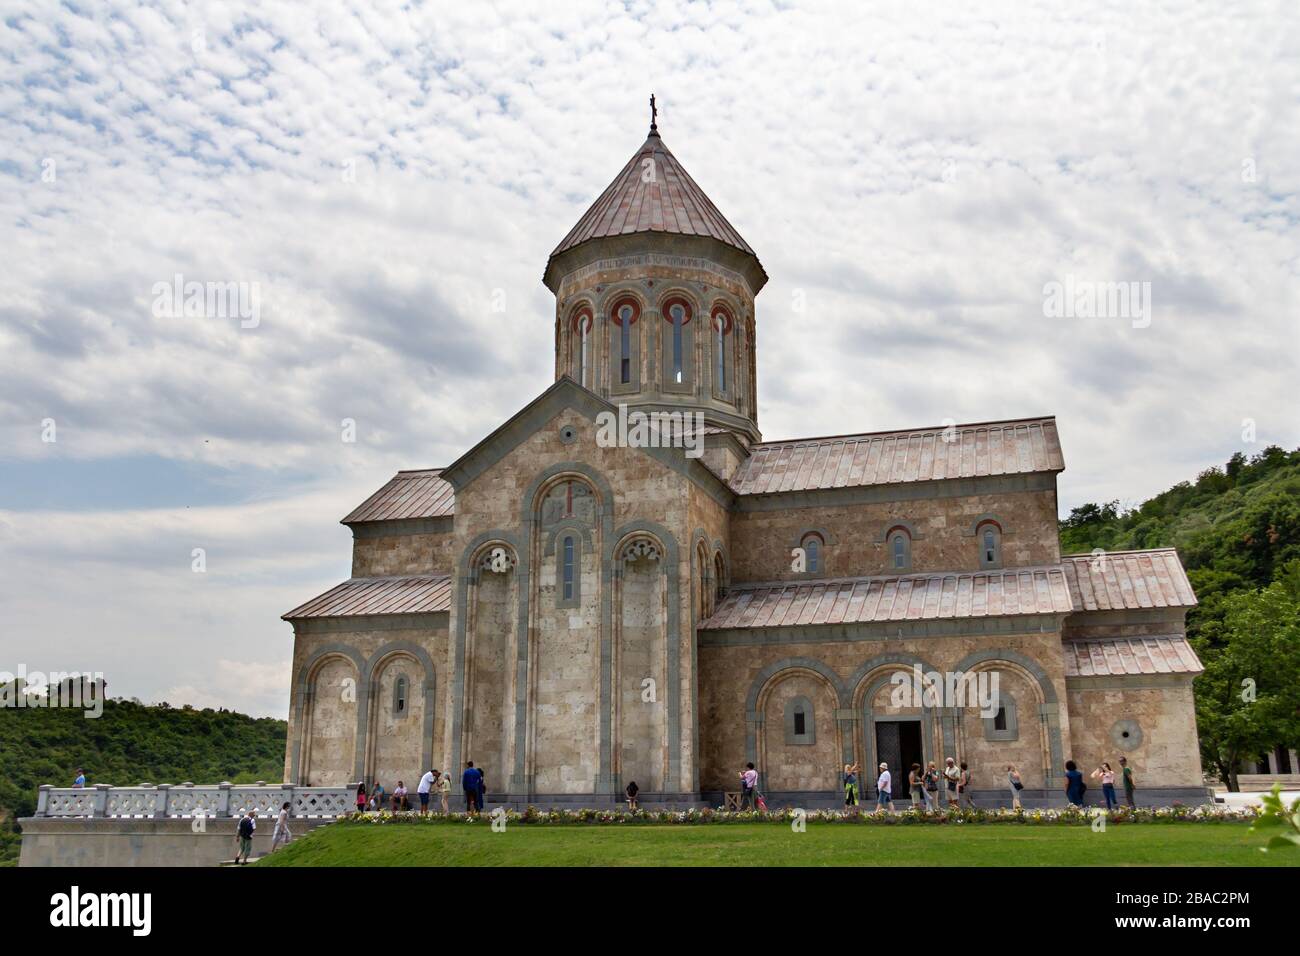 July 6, 2019 - Bodbe, Georgia - The Monastery of St. Nino at Bodbe is a Georgian Orthodox church and other sacred buildings near Sighnaghi, Kakheti, G Stock Photo